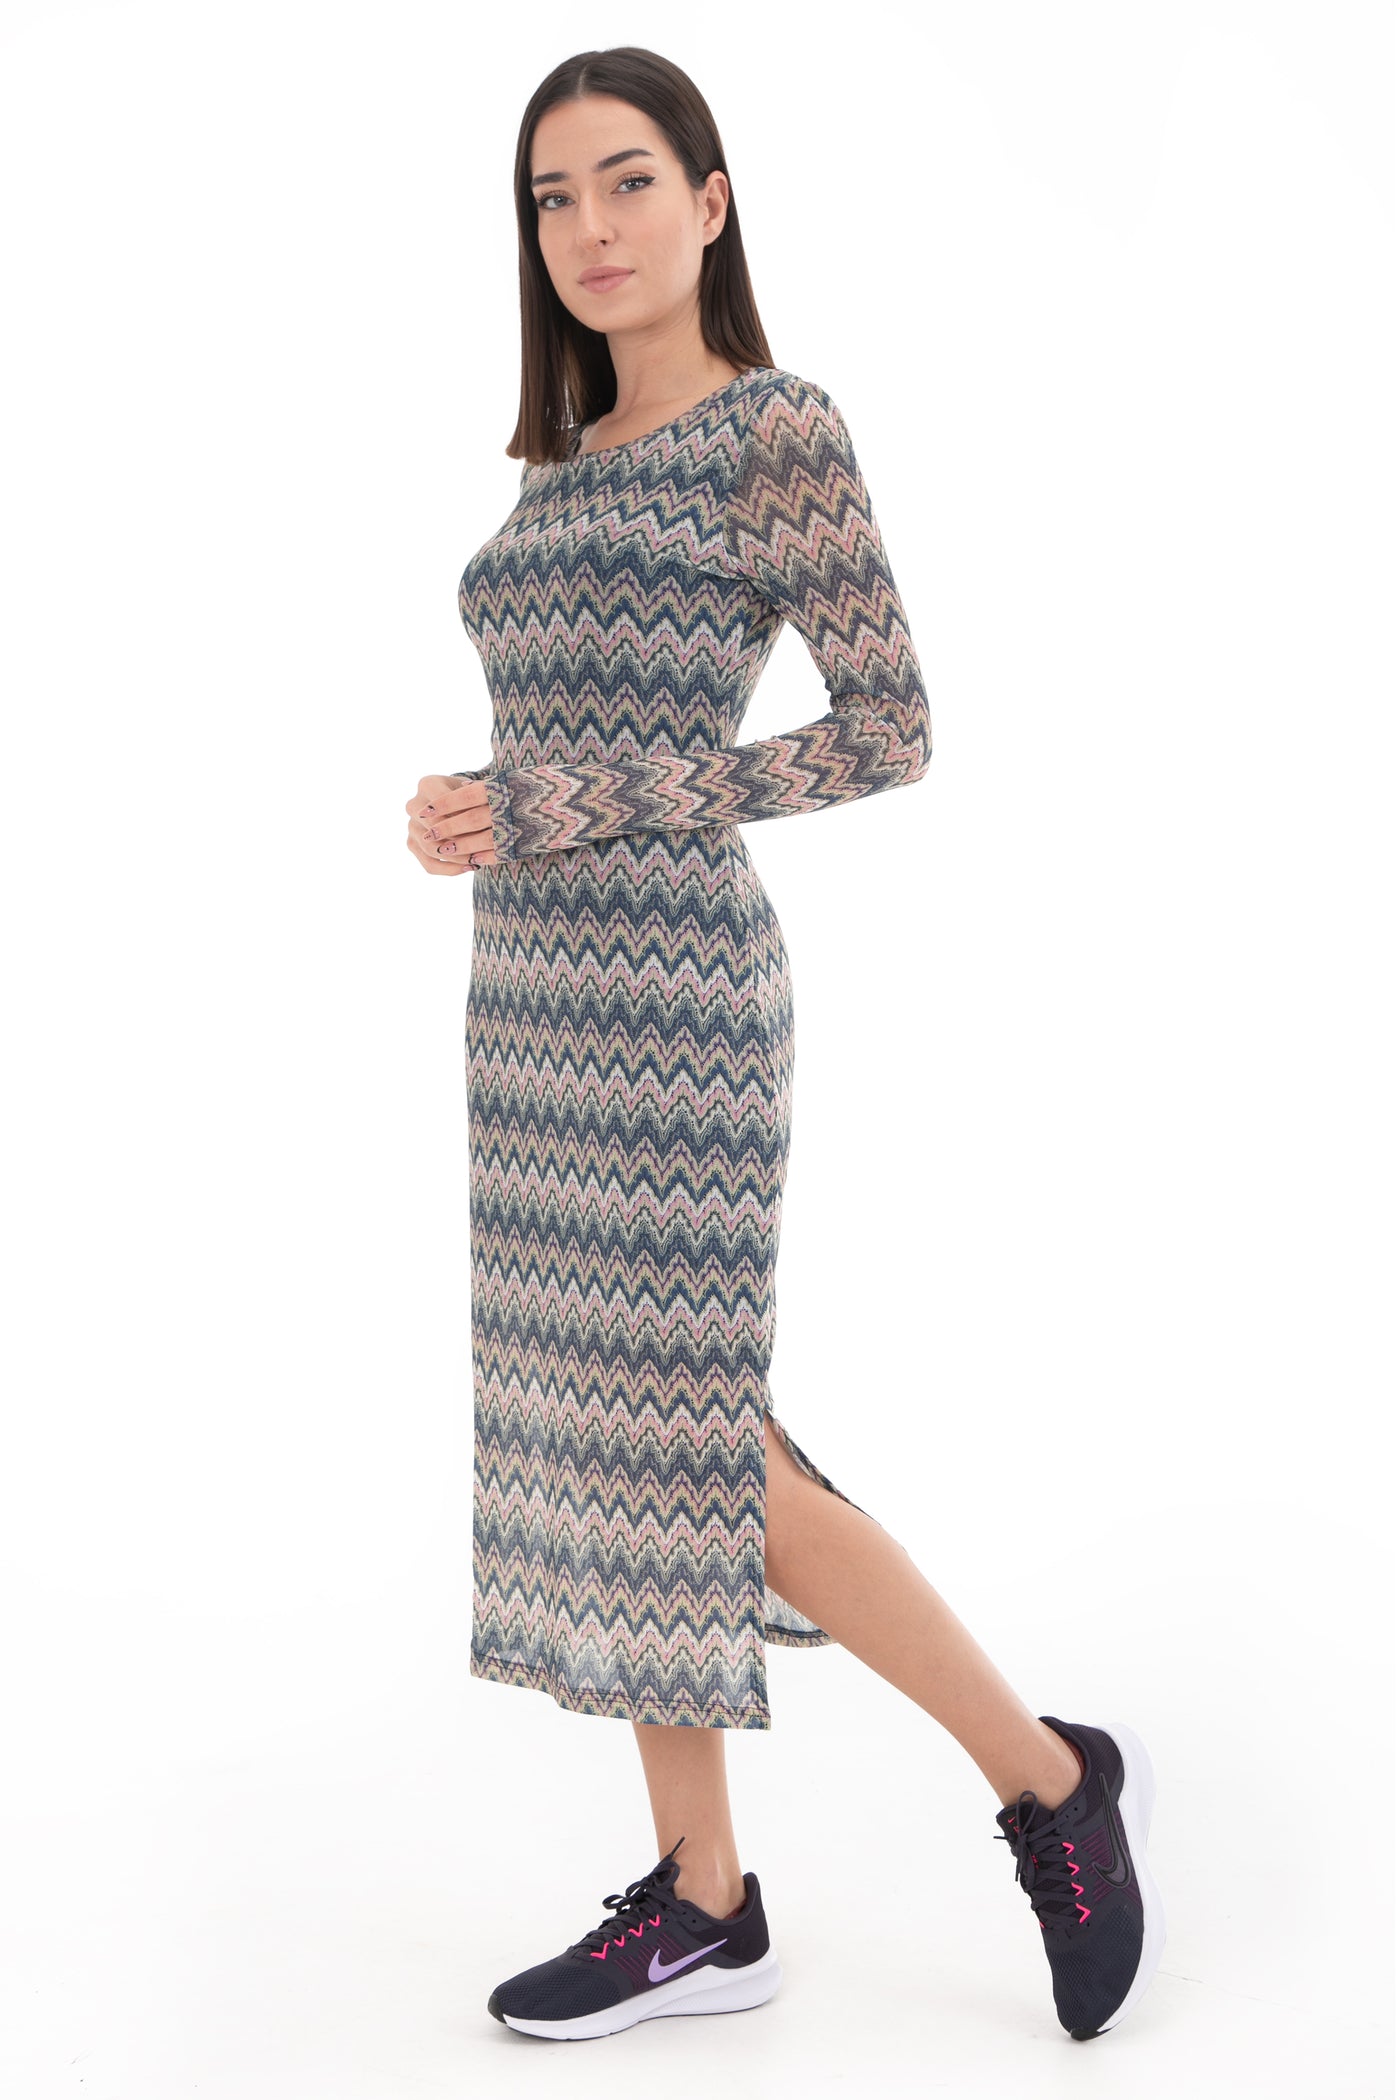 Chassca Printed Long Sleeve Recycled Polyester Mesh Dress